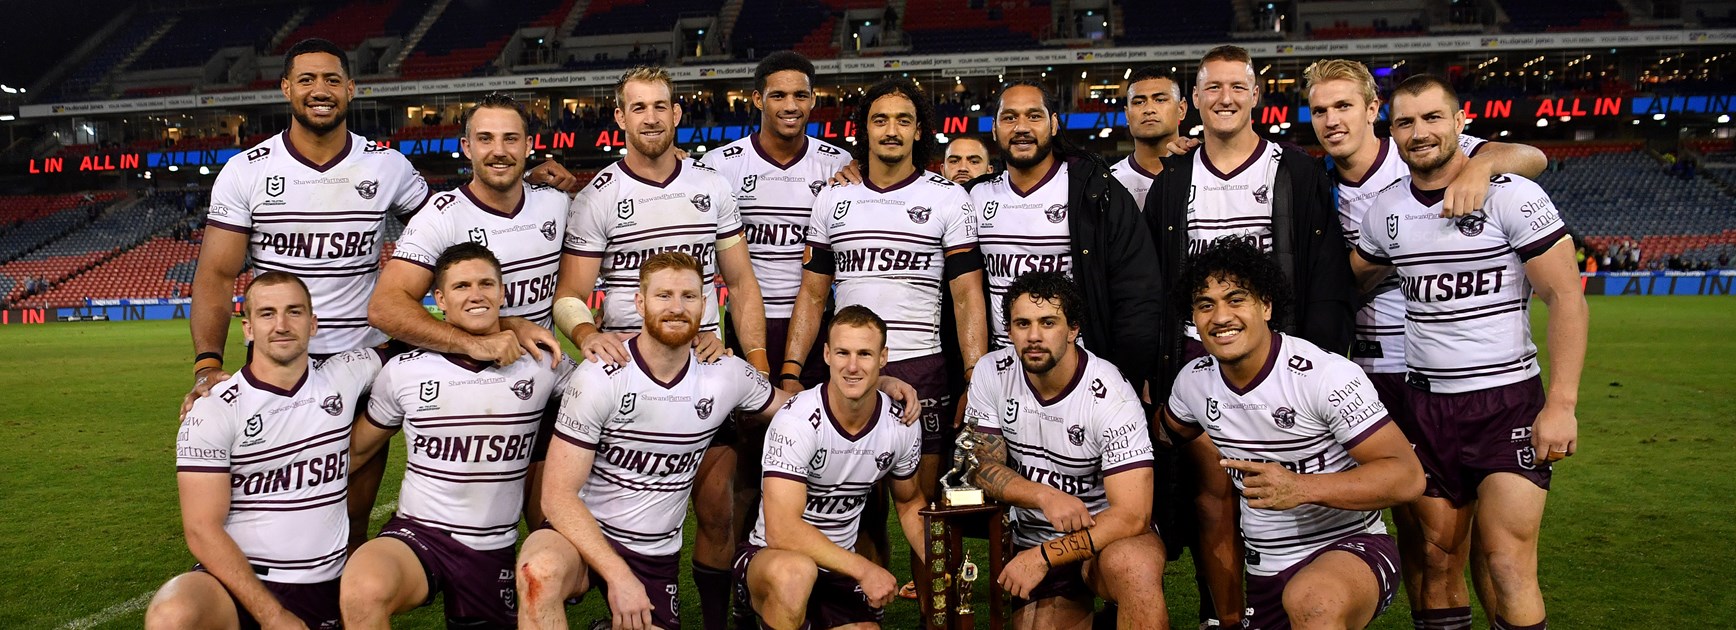 Sea Eagles capture Malcolm Reilly trophy